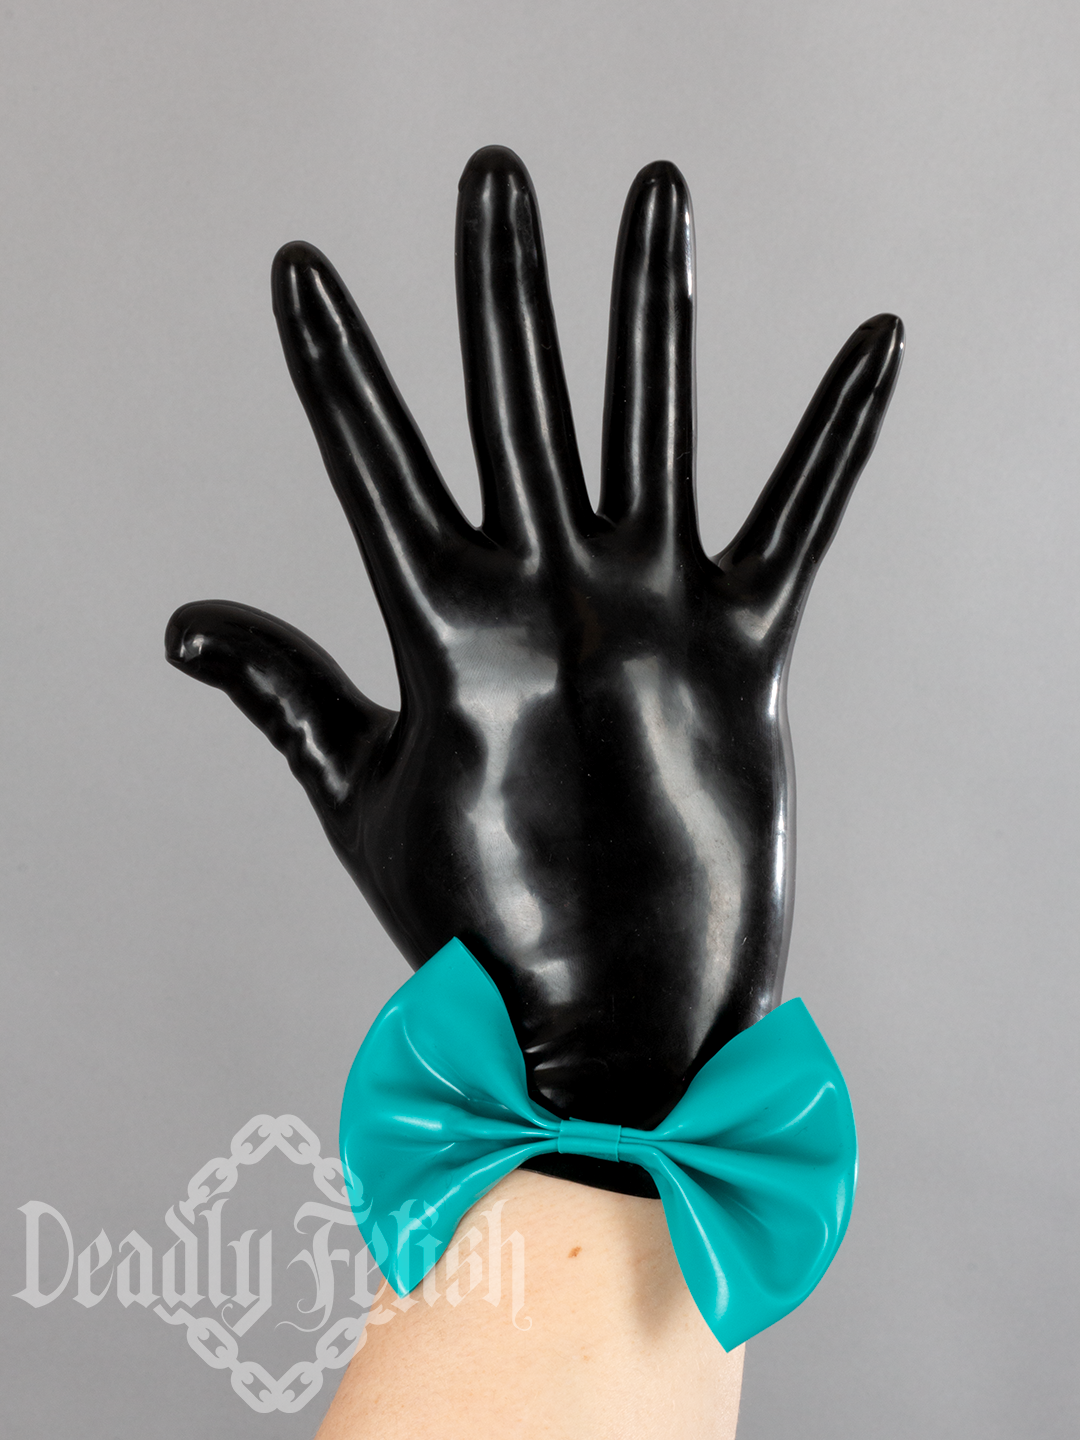 Deadly Fetish Latex: Gloves With Bows